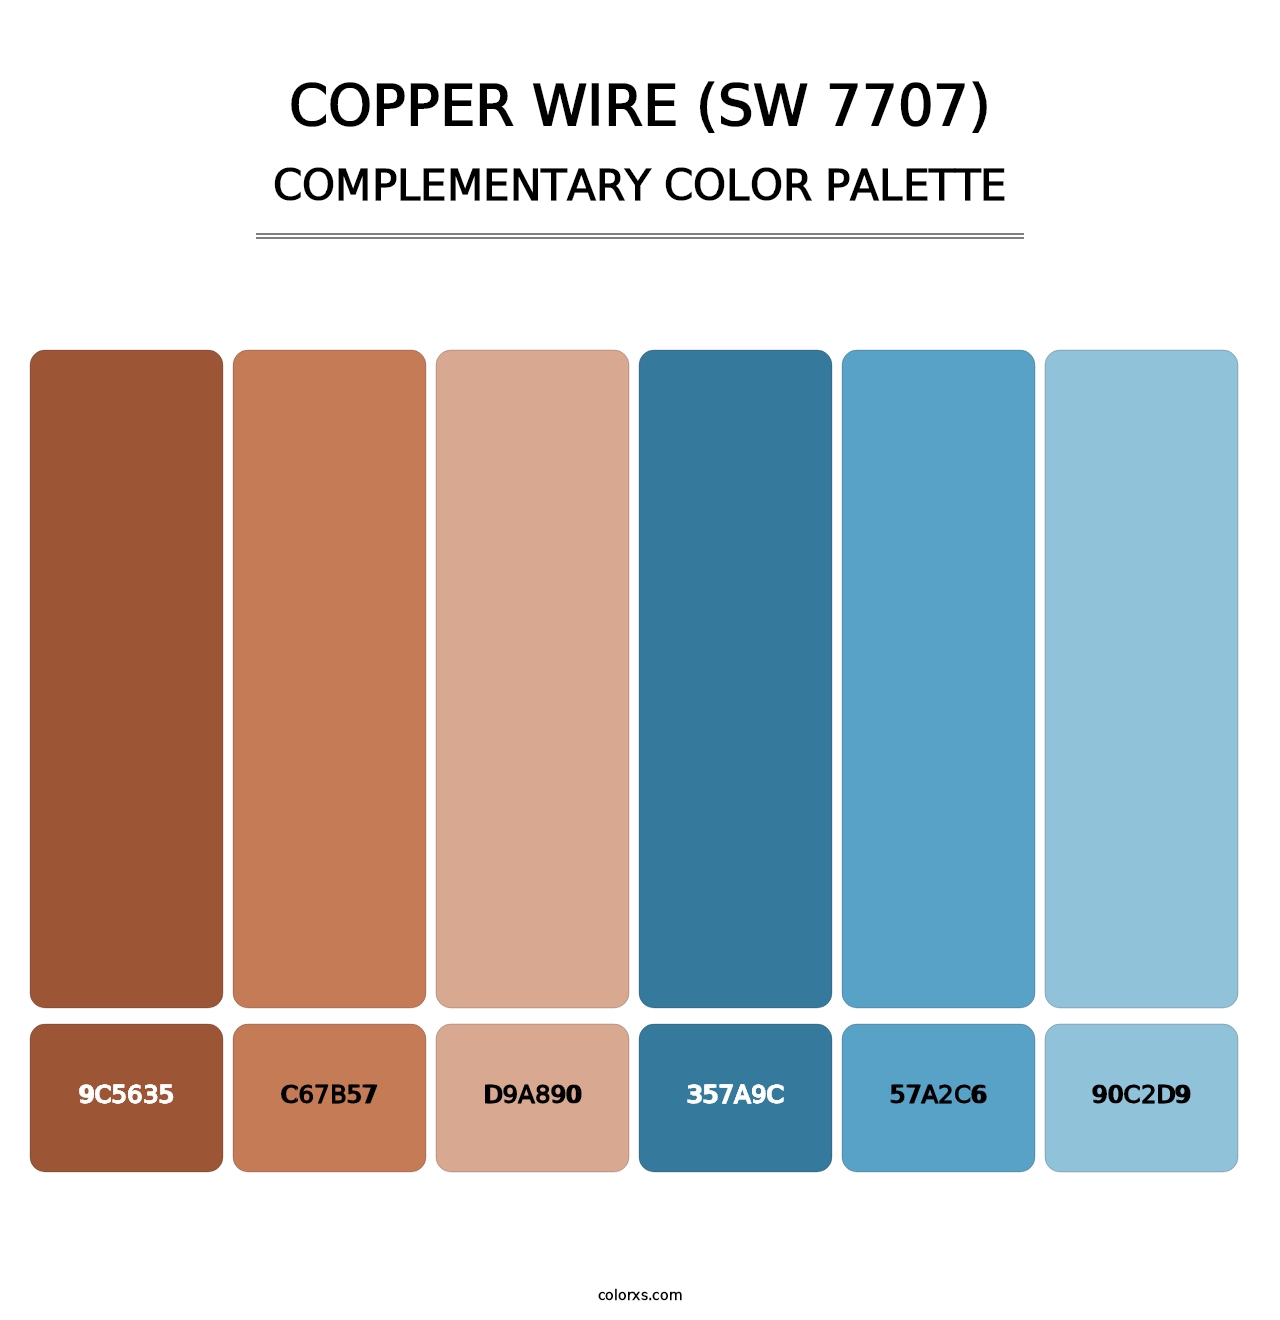 Copper Wire (SW 7707) - Complementary Color Palette